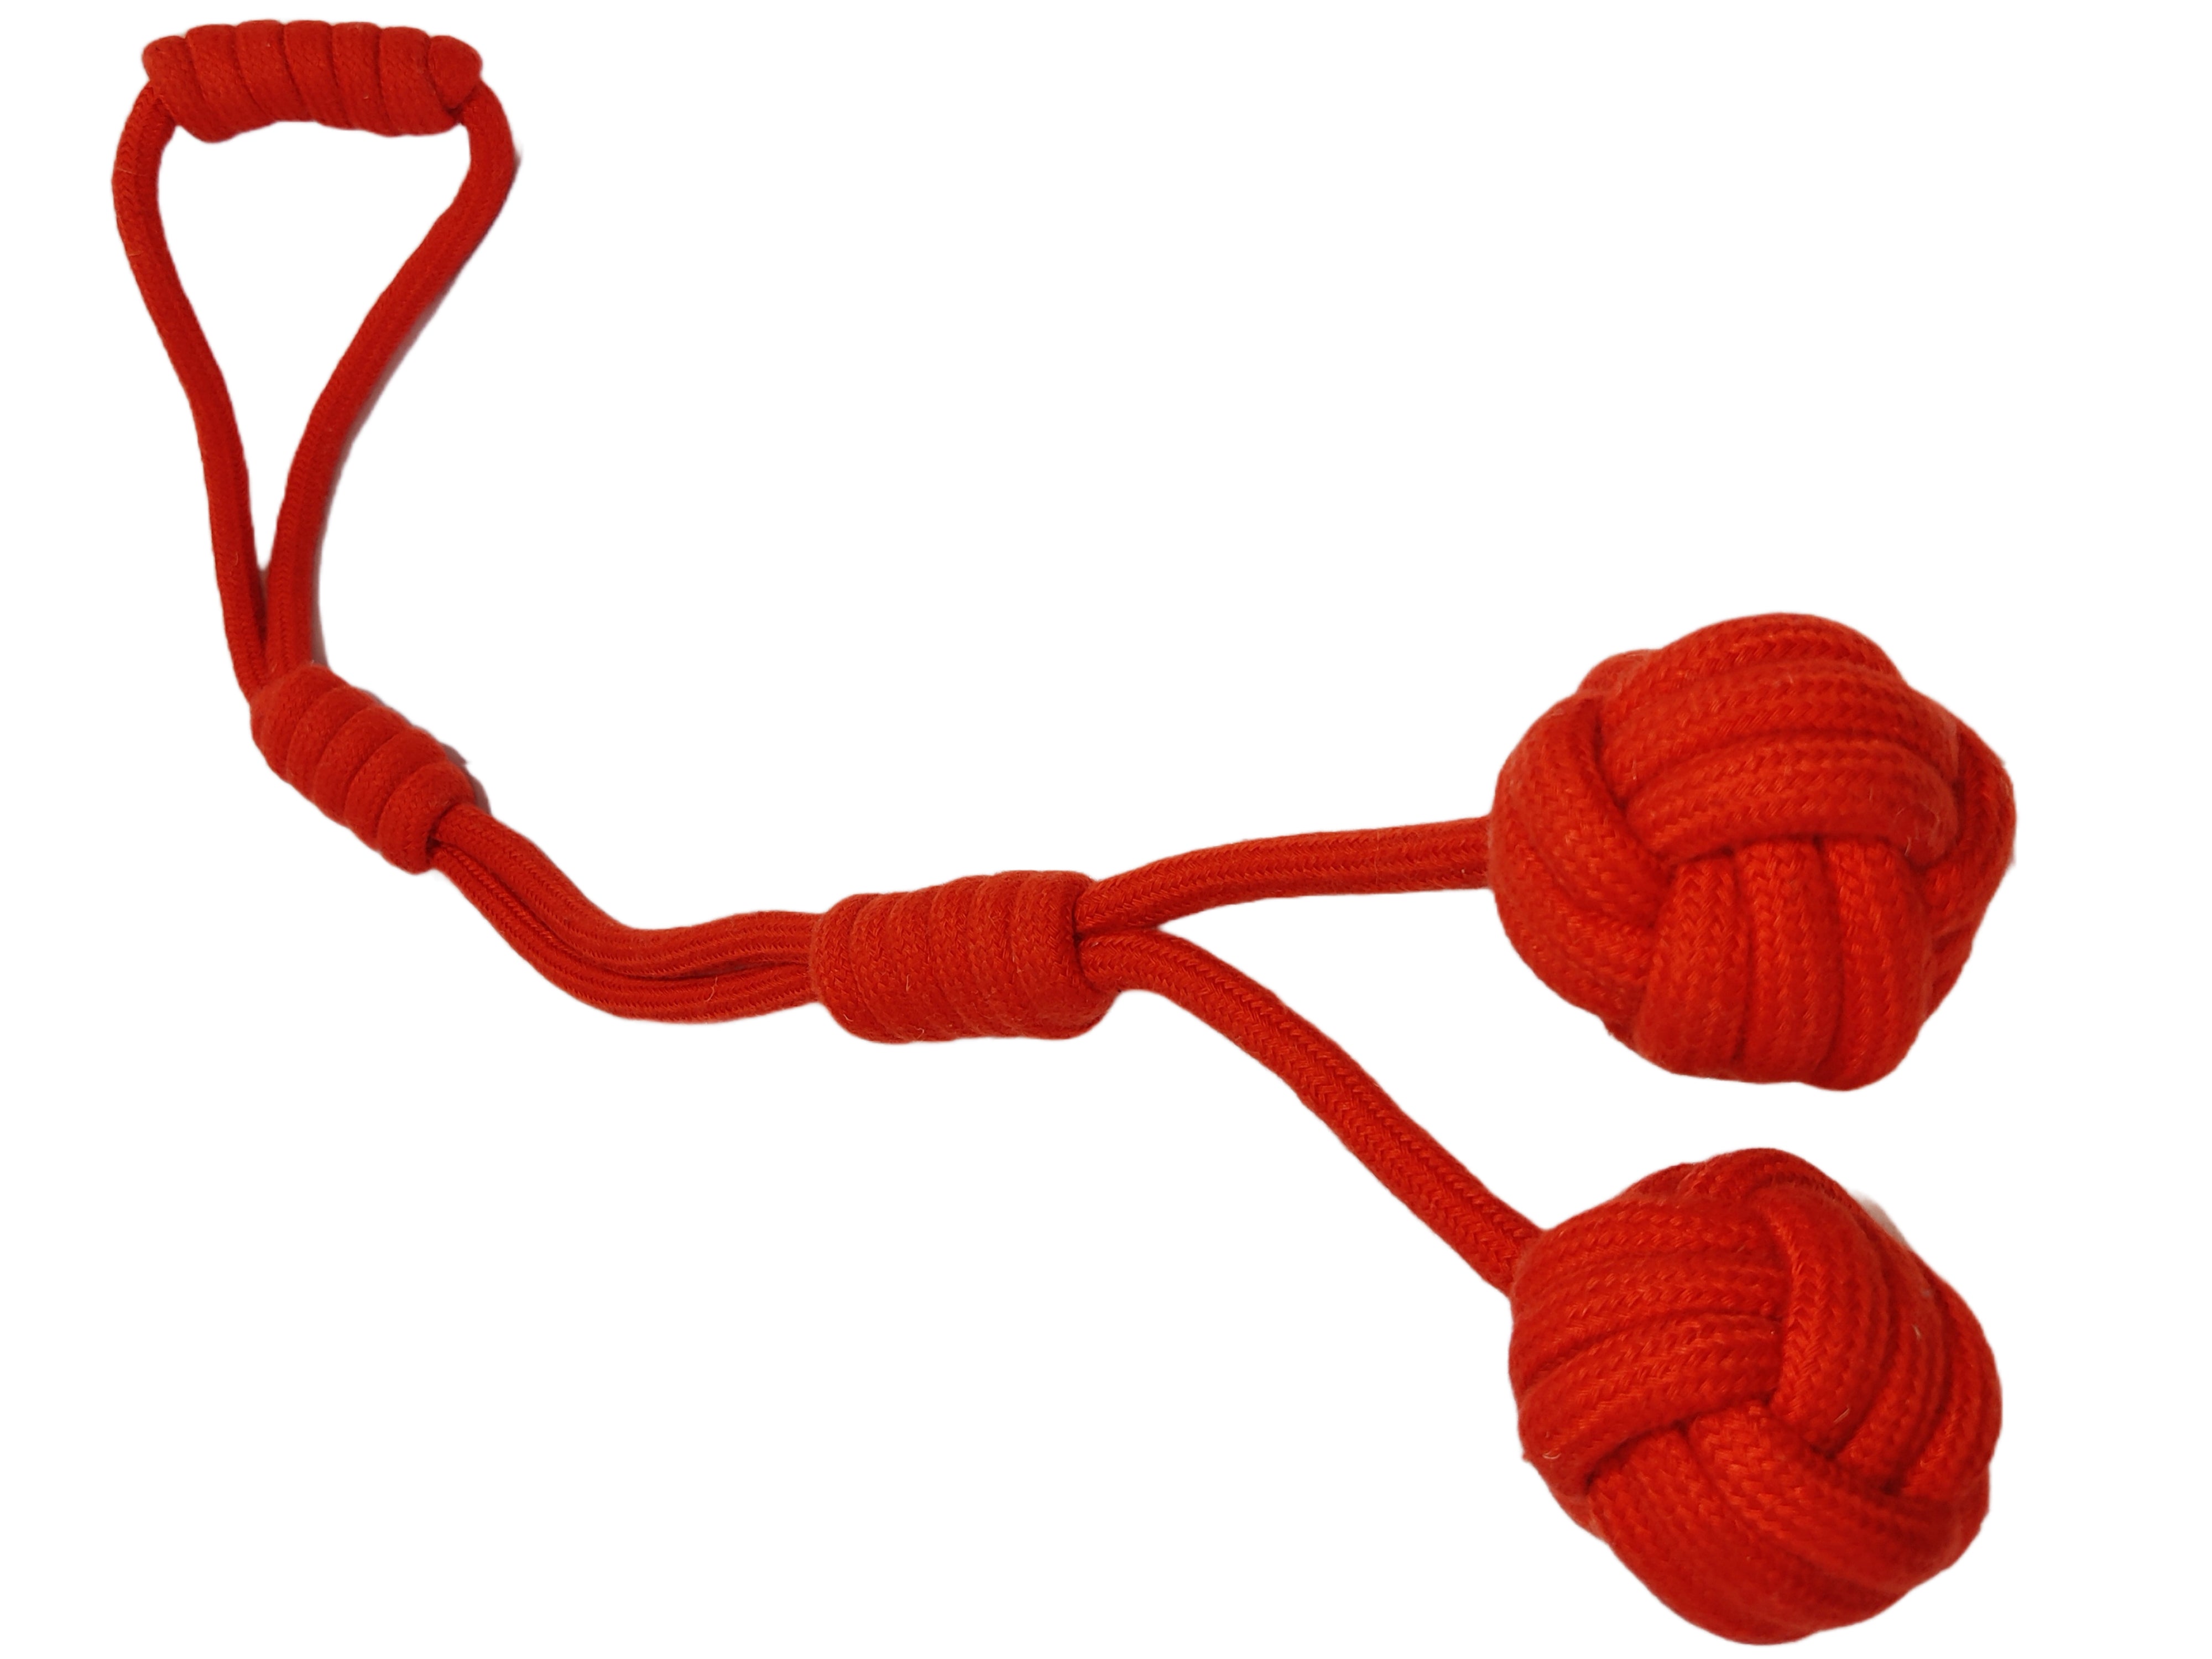 Tug Toy with Handle and 2 Rope Balls for Indoor and Outdoor Play,Interactive Bond Building Tug Toy,Ruby Woof Red